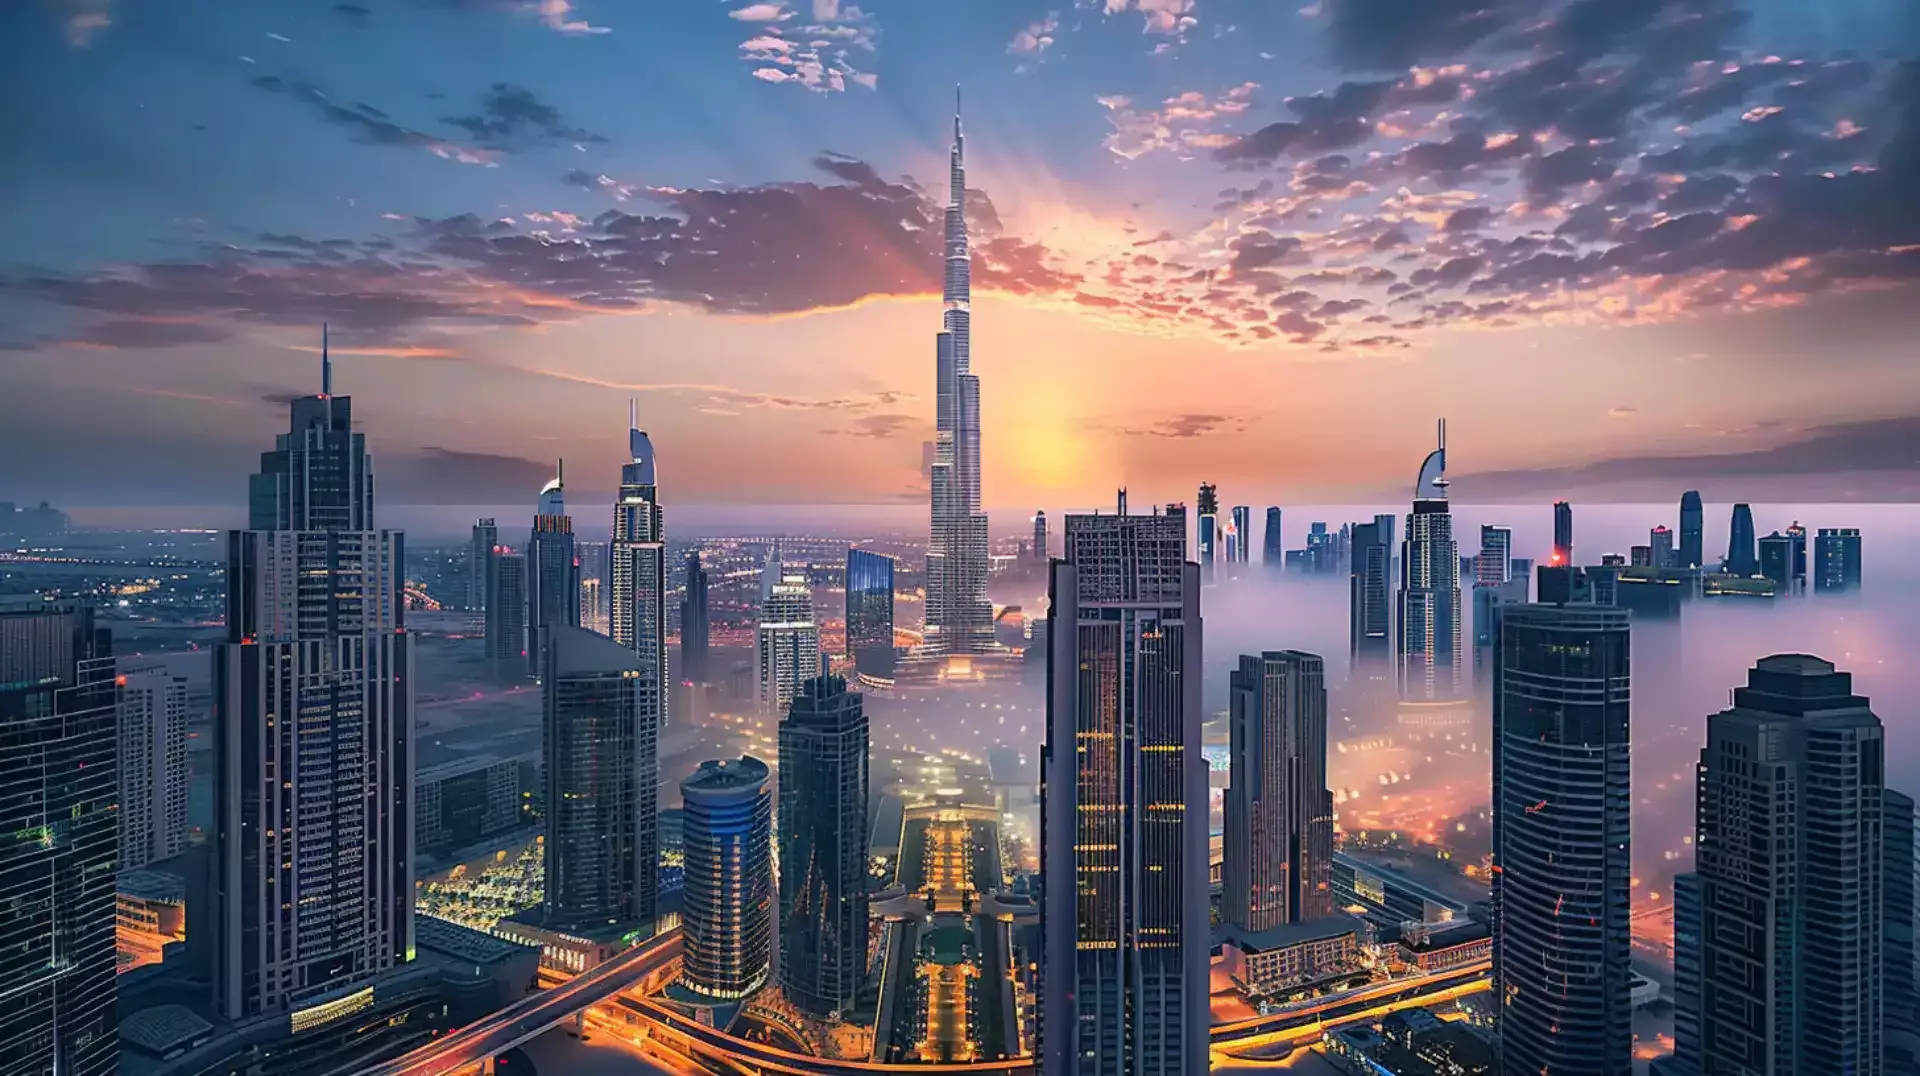 A compelling image highlighting the diverse business opportunities available in Dubai